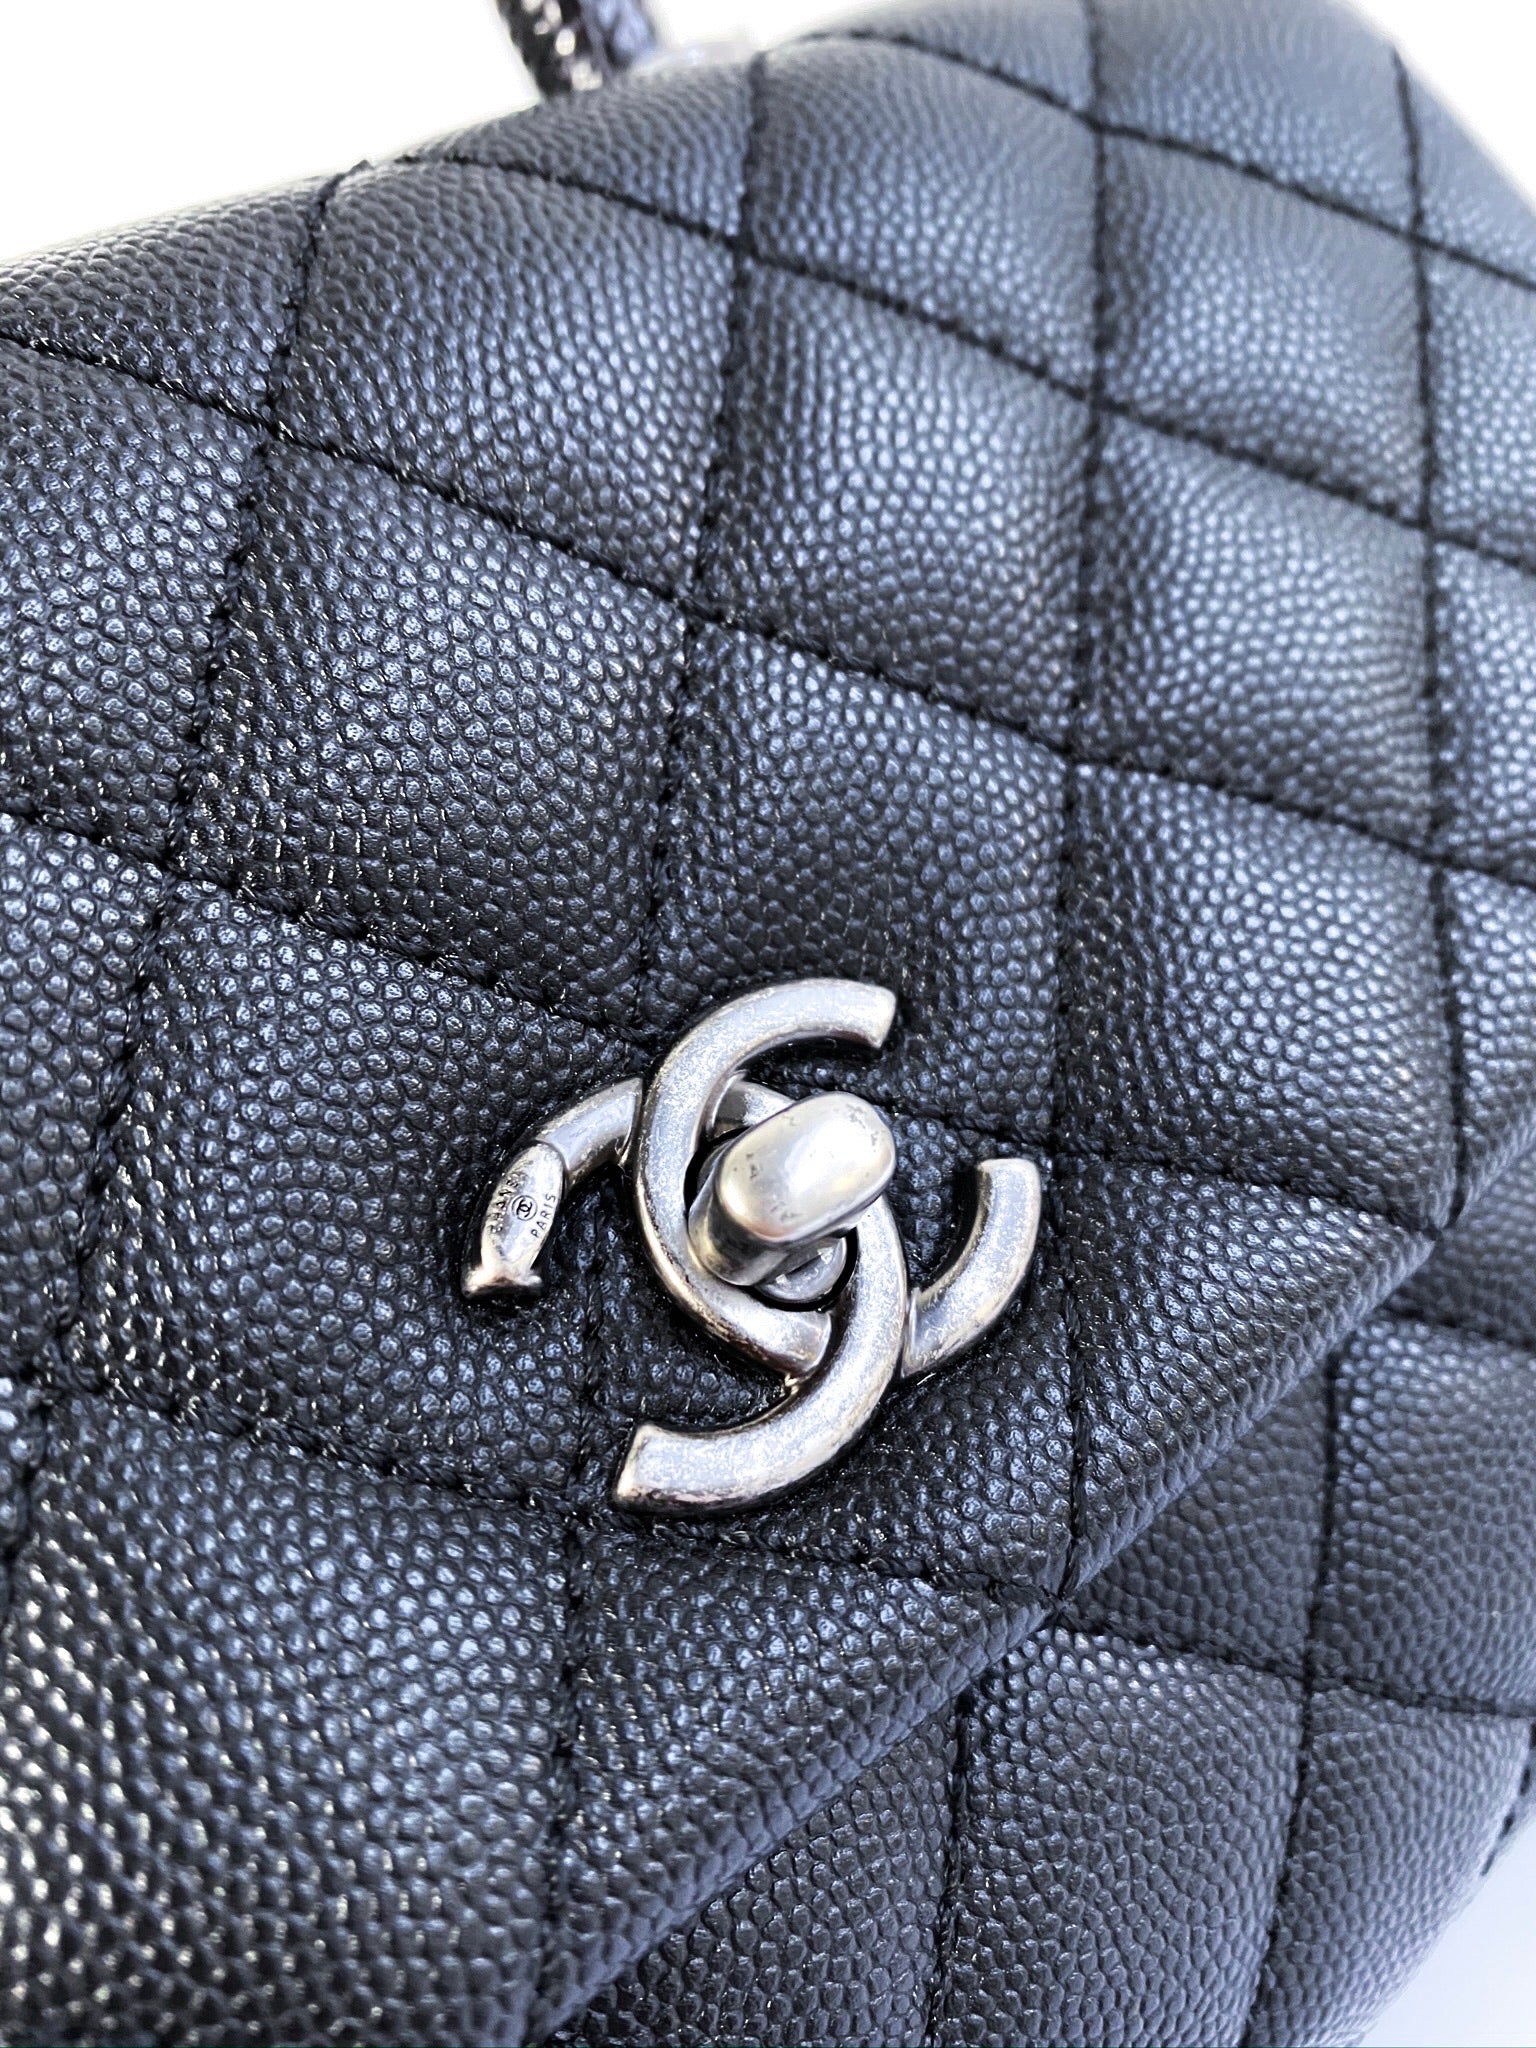 Chanel Coco Handle Bag Quilted Grained Caviar Ruthenium Mini Black - US